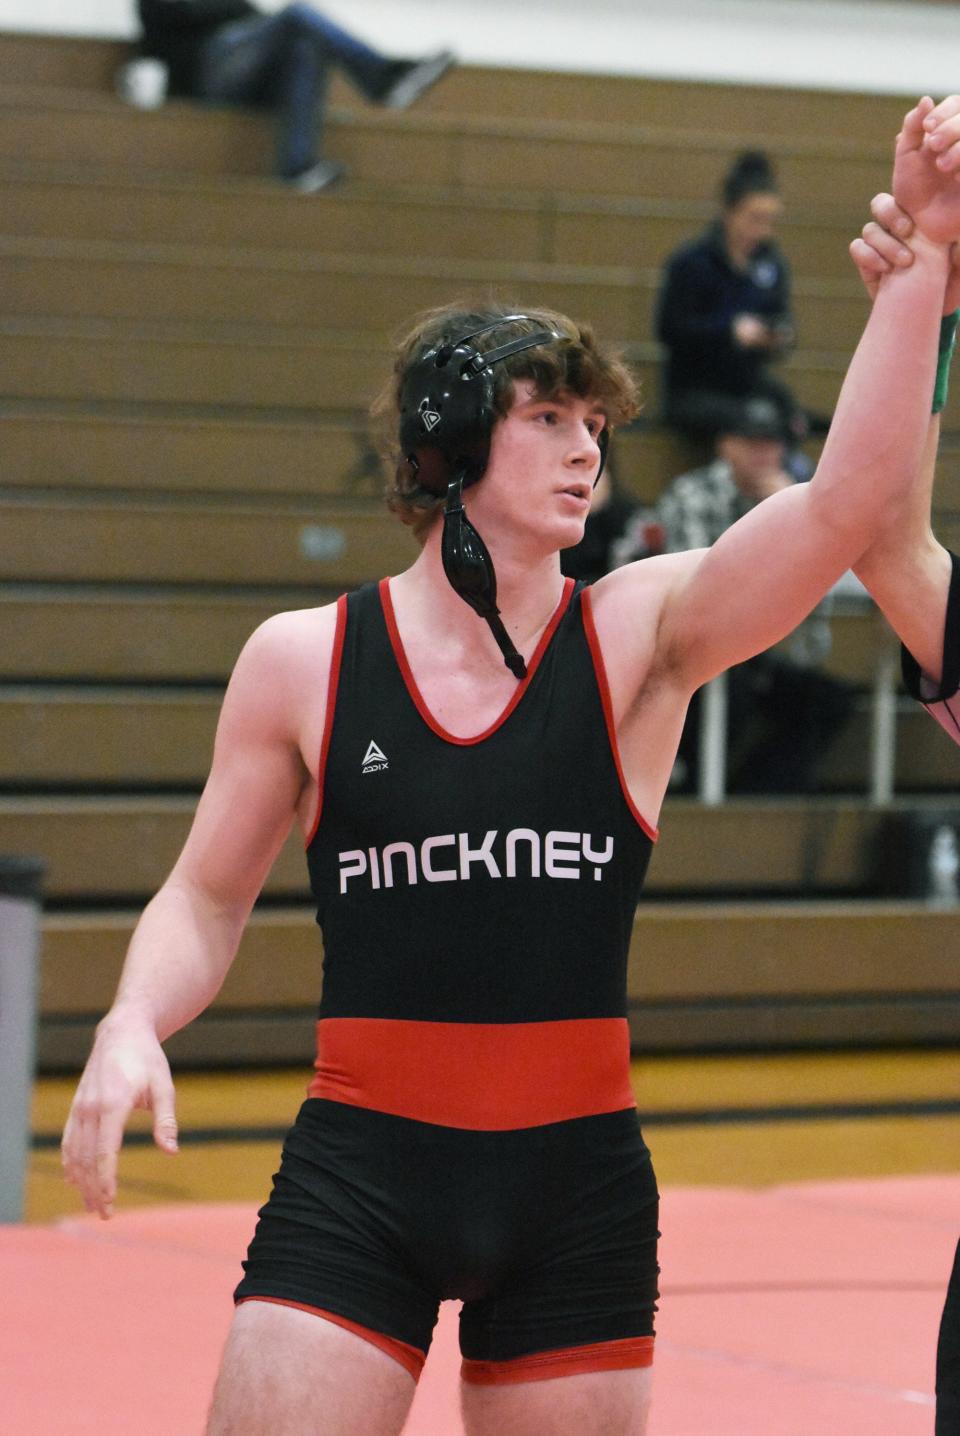 Pinckney's Brady Raymond improved to 17-1 by winning the 171-pound weight class at the Lakeview Varsity Invitational in Battle Creek.